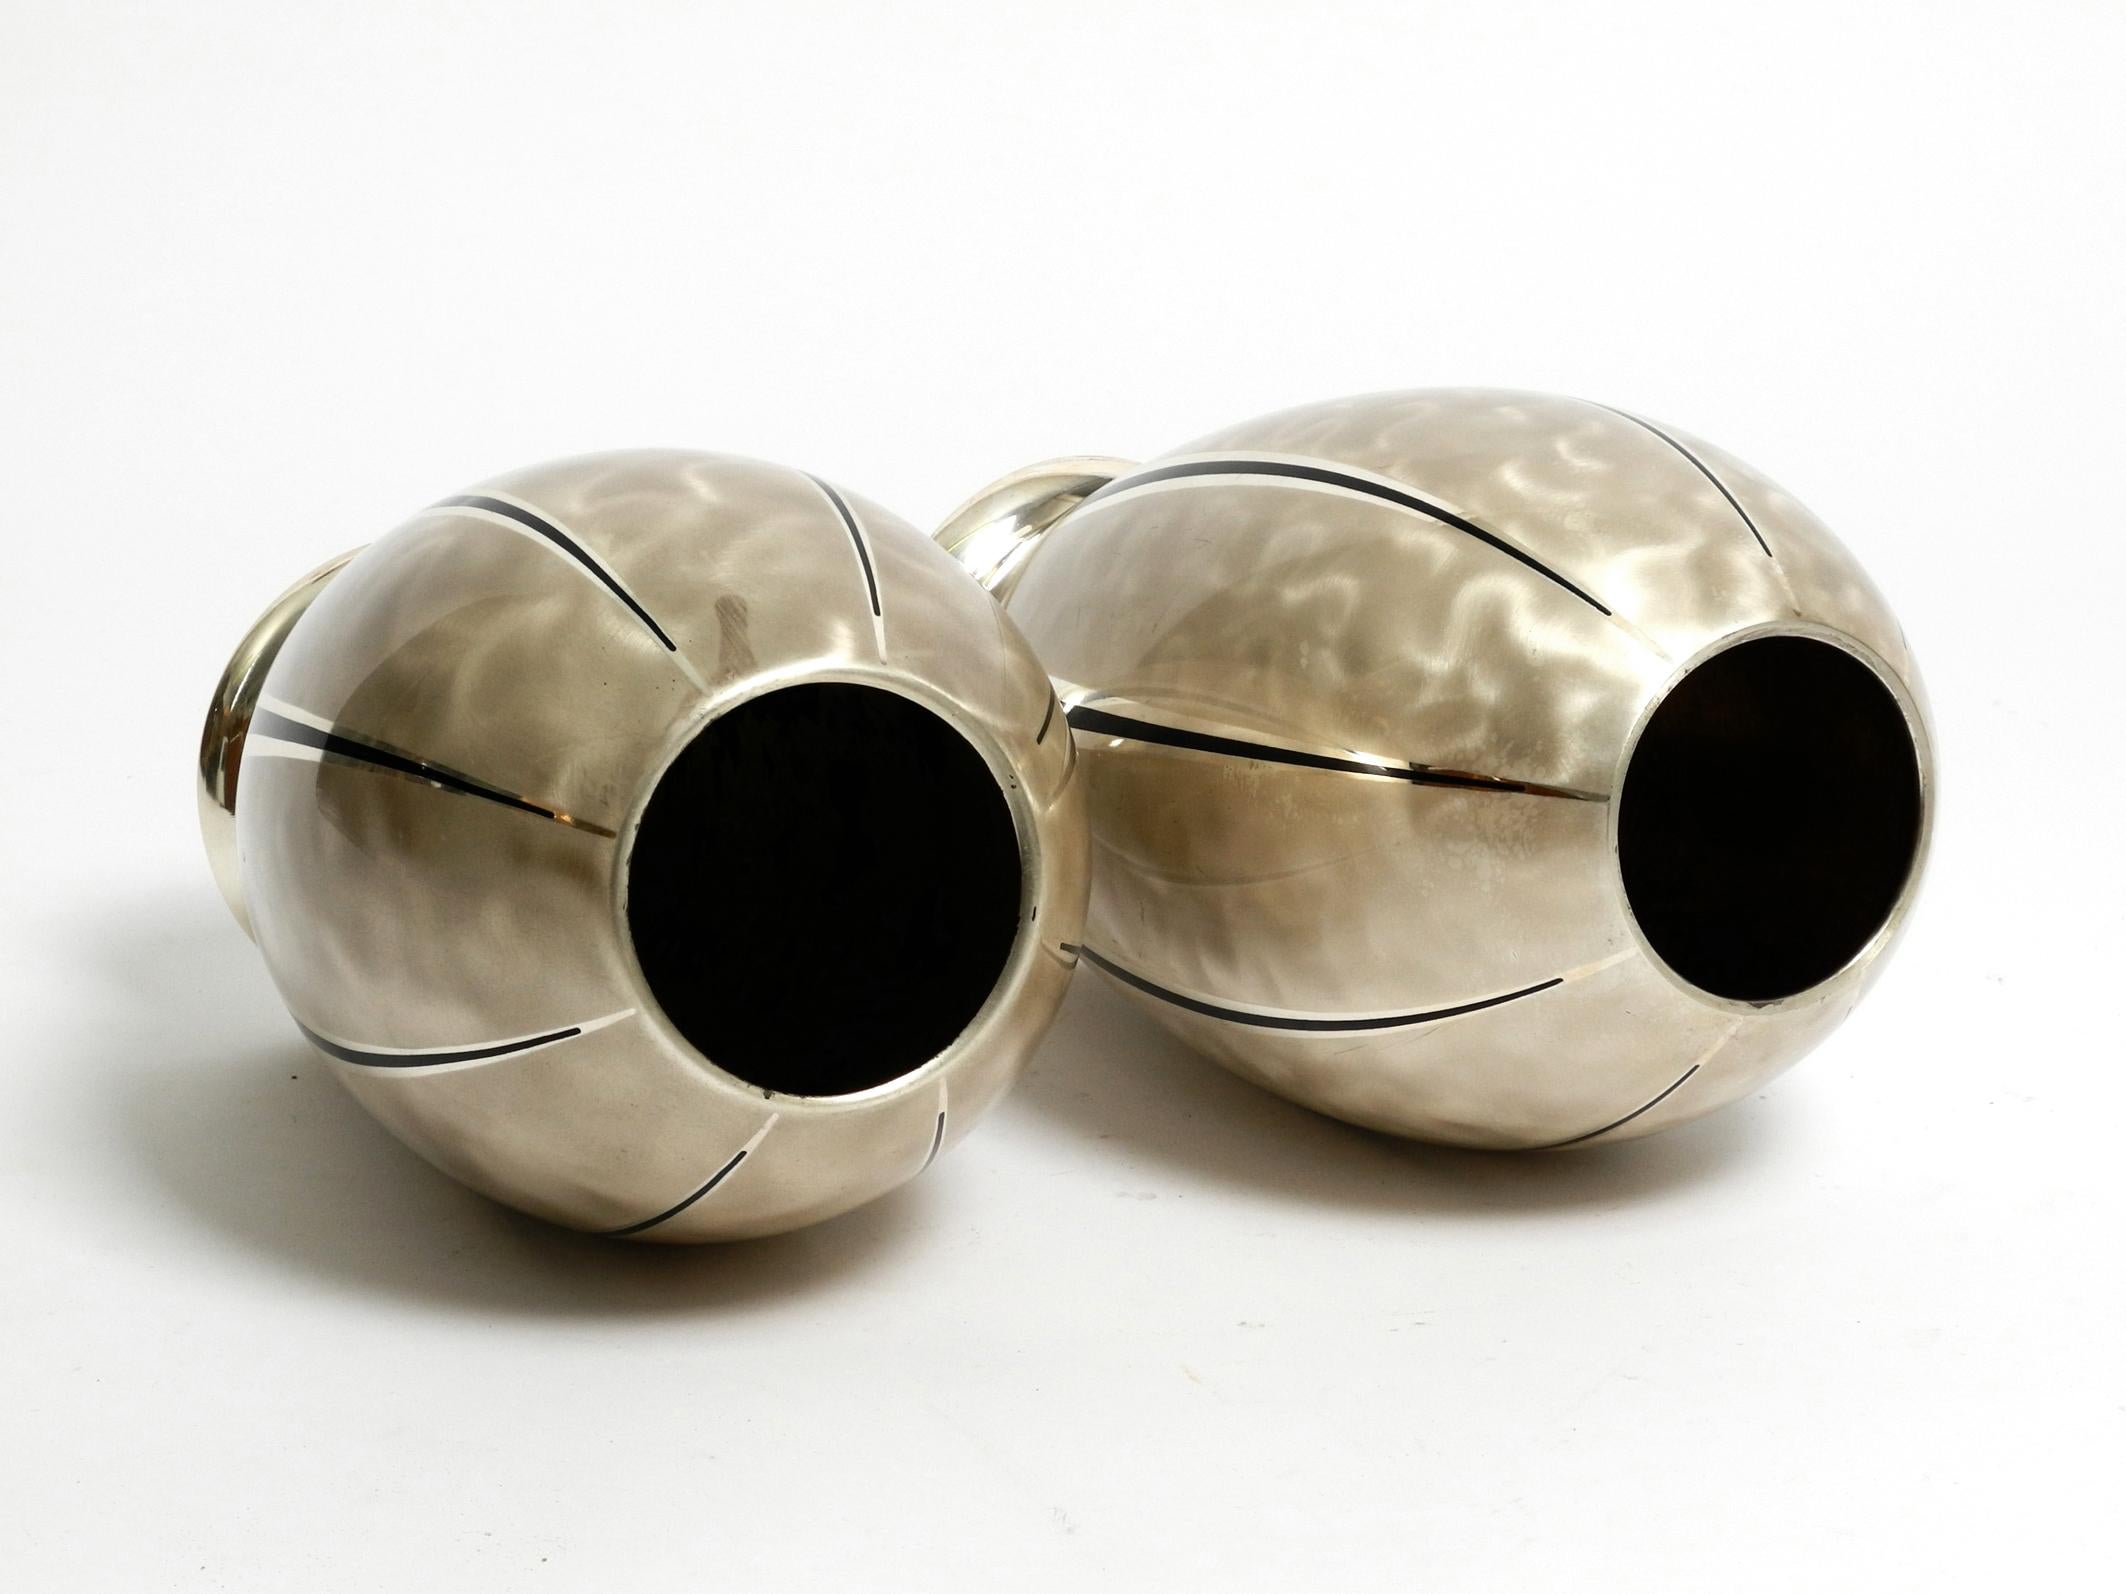 Pair of Mid Century Modern WMF Ikora table vases made of silver-plated brass In Good Condition For Sale In München, DE